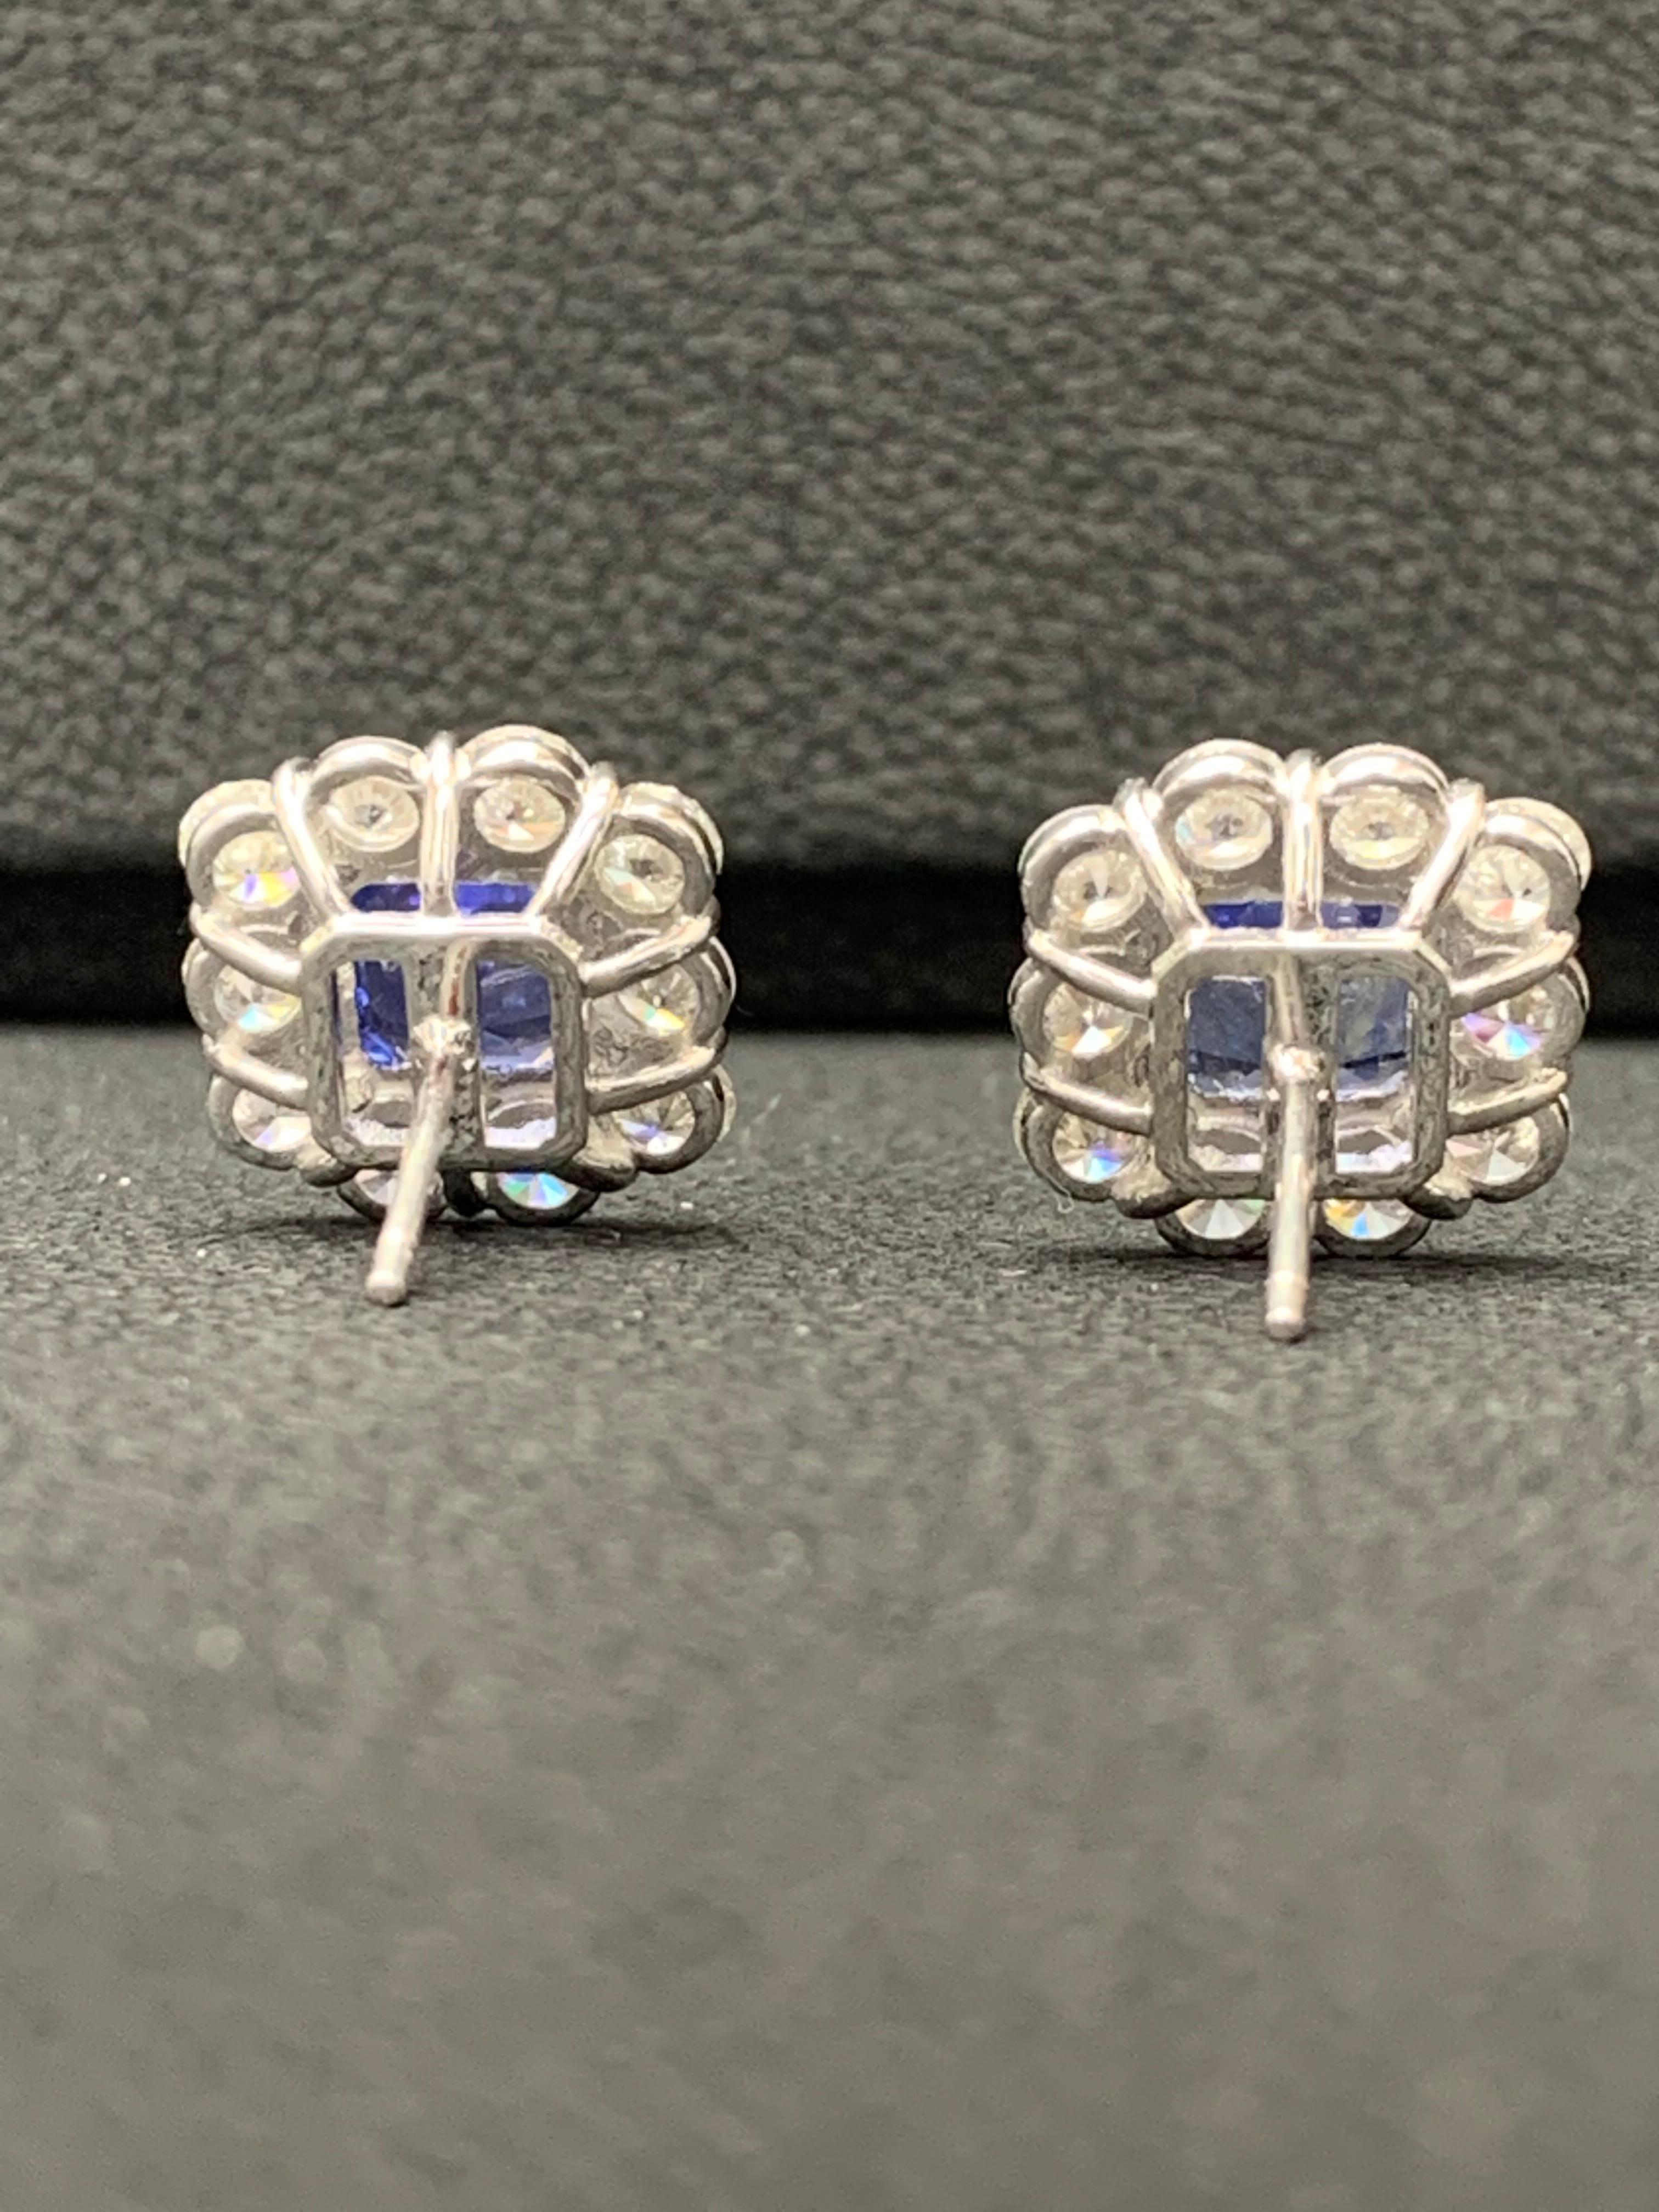 3.02 Carat Emerald Cut Blue Sapphire and Diamond Stud Earrings in 18K White Gold For Sale 3